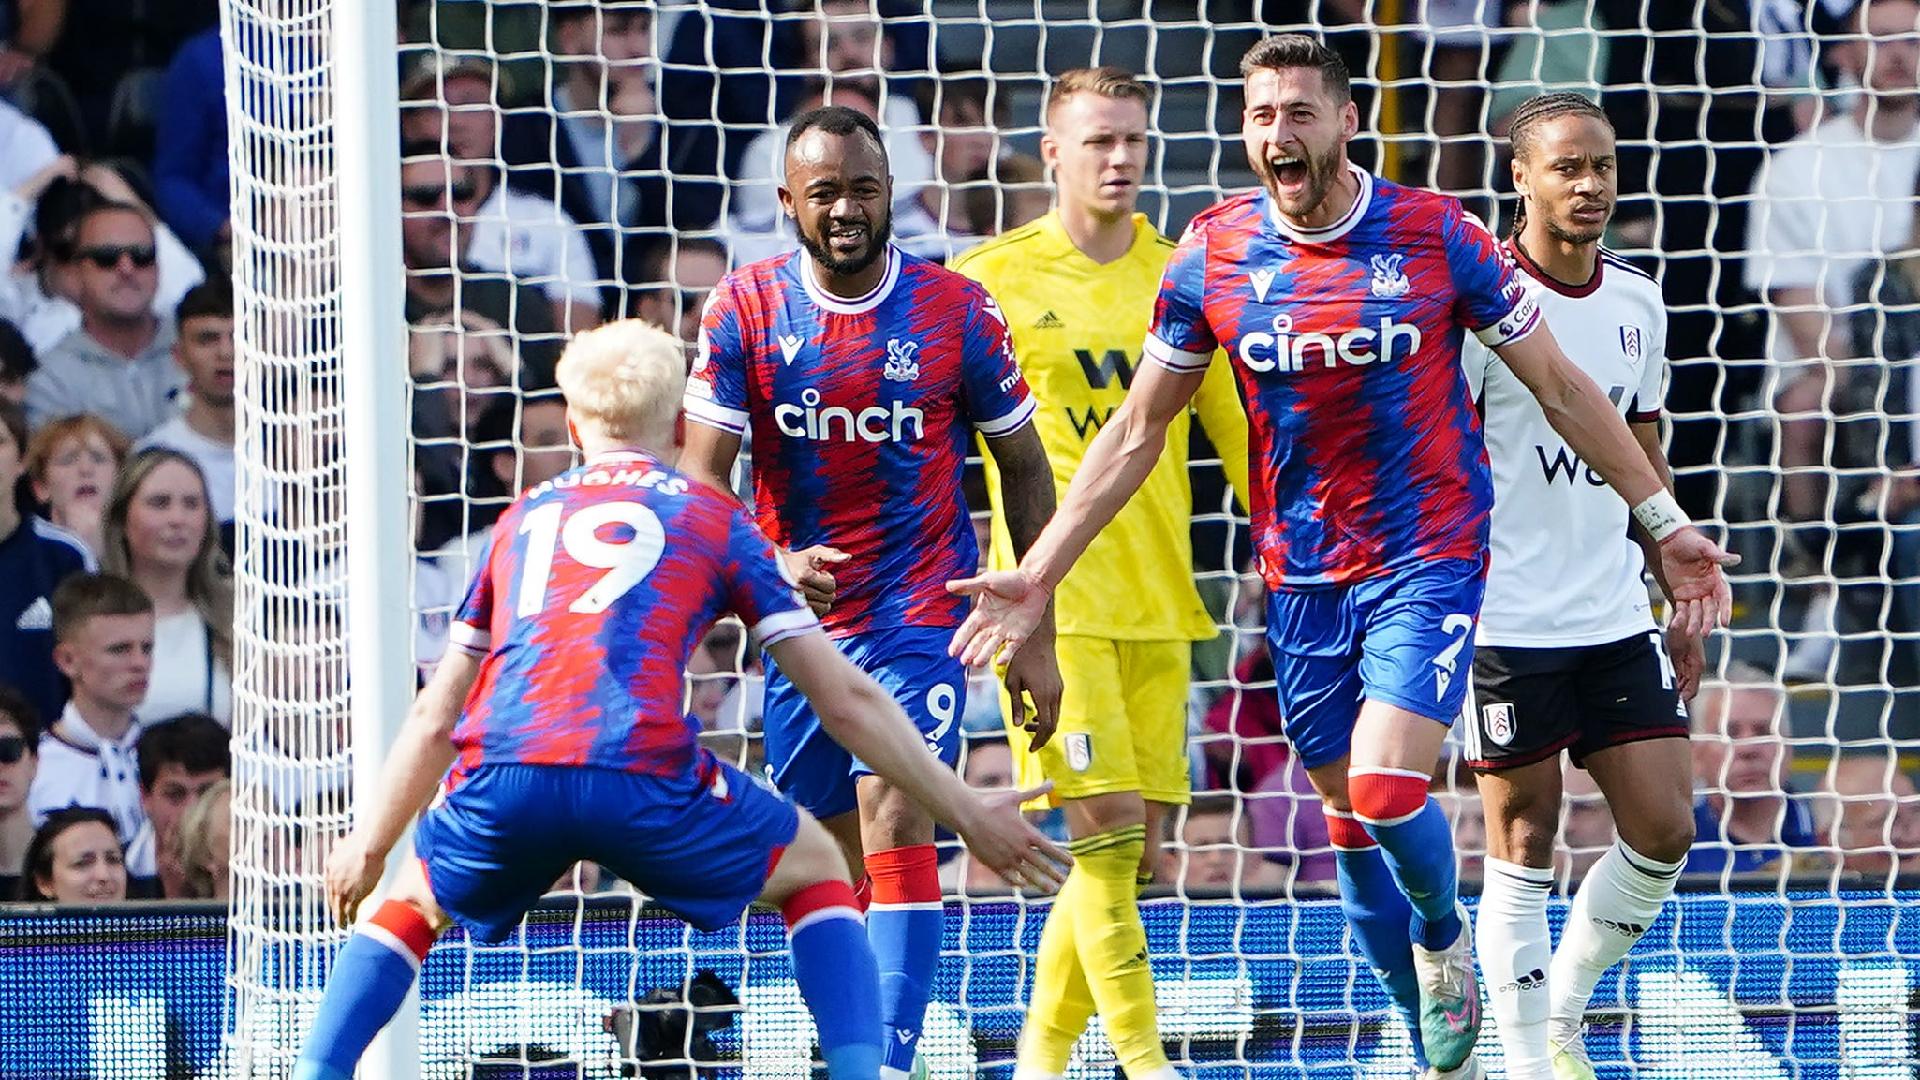 Ward levels late to earn Palace a draw at Fulham